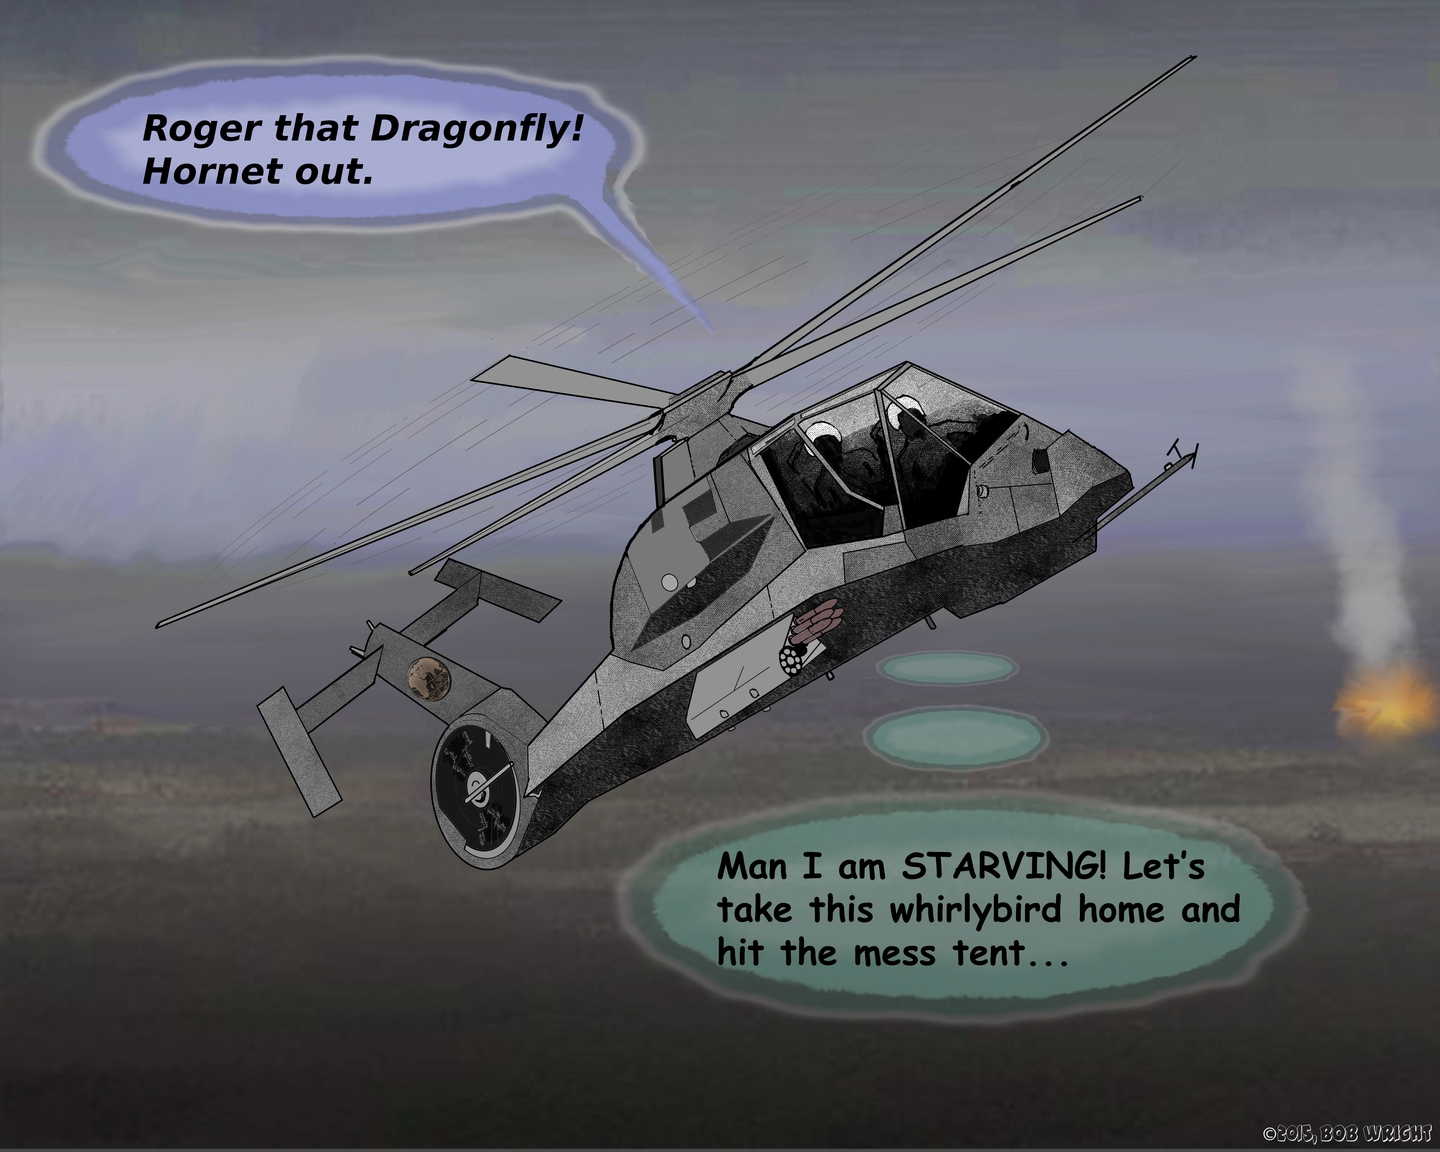 Hornet with target fire larger and pall of smoke, radio text "Roger that Dragonfly! Hornet out." and crew comm text, "Man I am STARVING! Let's take this whirlybird home and hit the mess tent..."